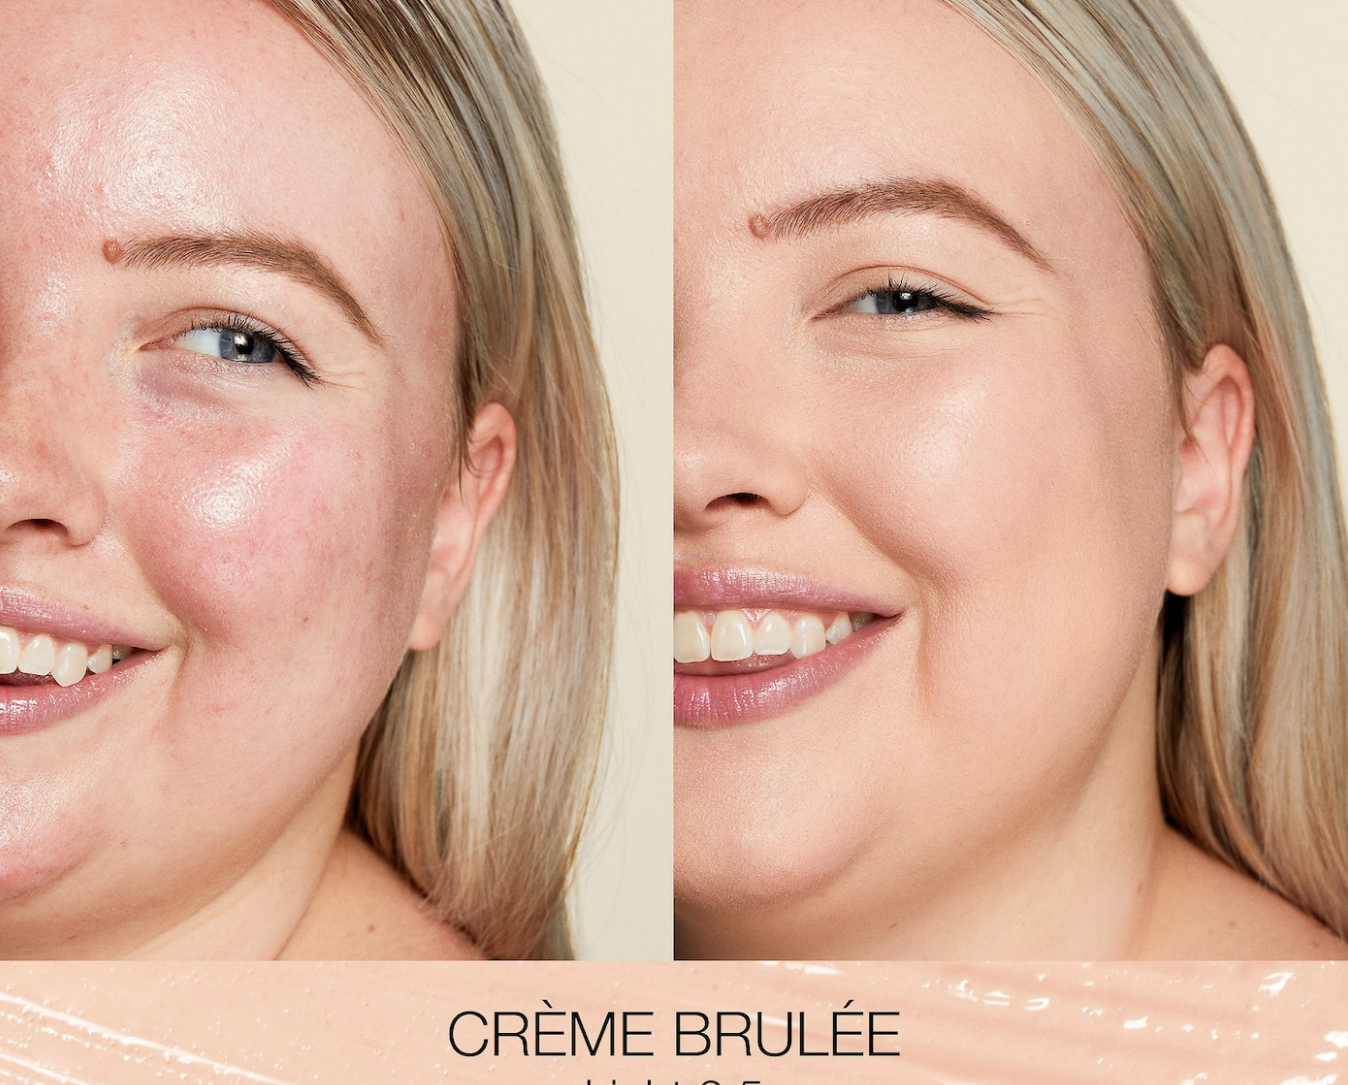 a model&#x27;s before photo showing redness and an after photo wearing the concealer and redness covered.